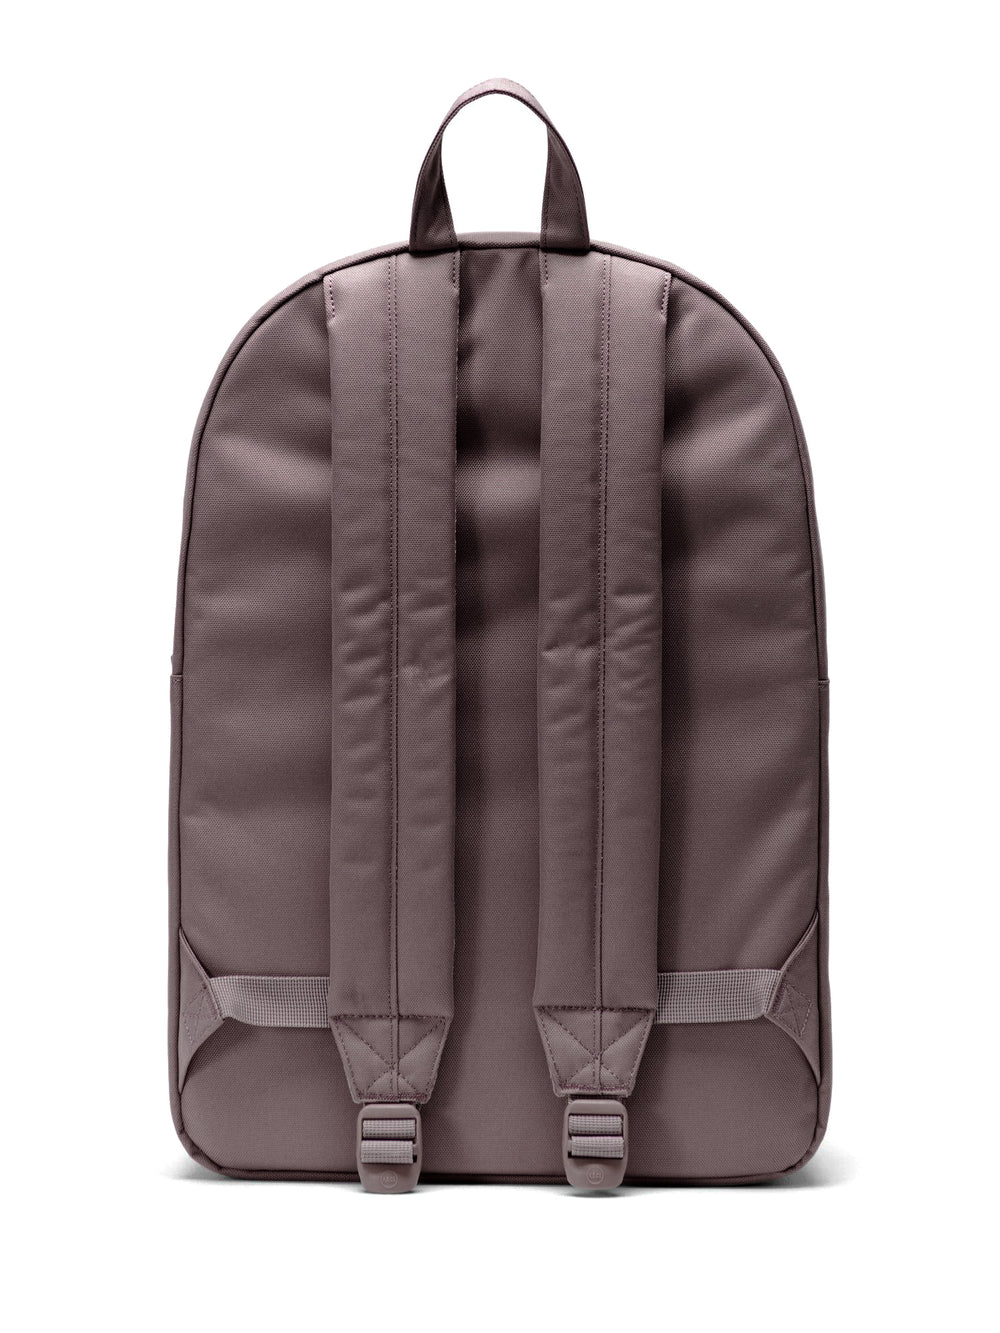 HERSCHEL SUPPLY CO. MIDWAY 25L BACKPACK - SPARROW